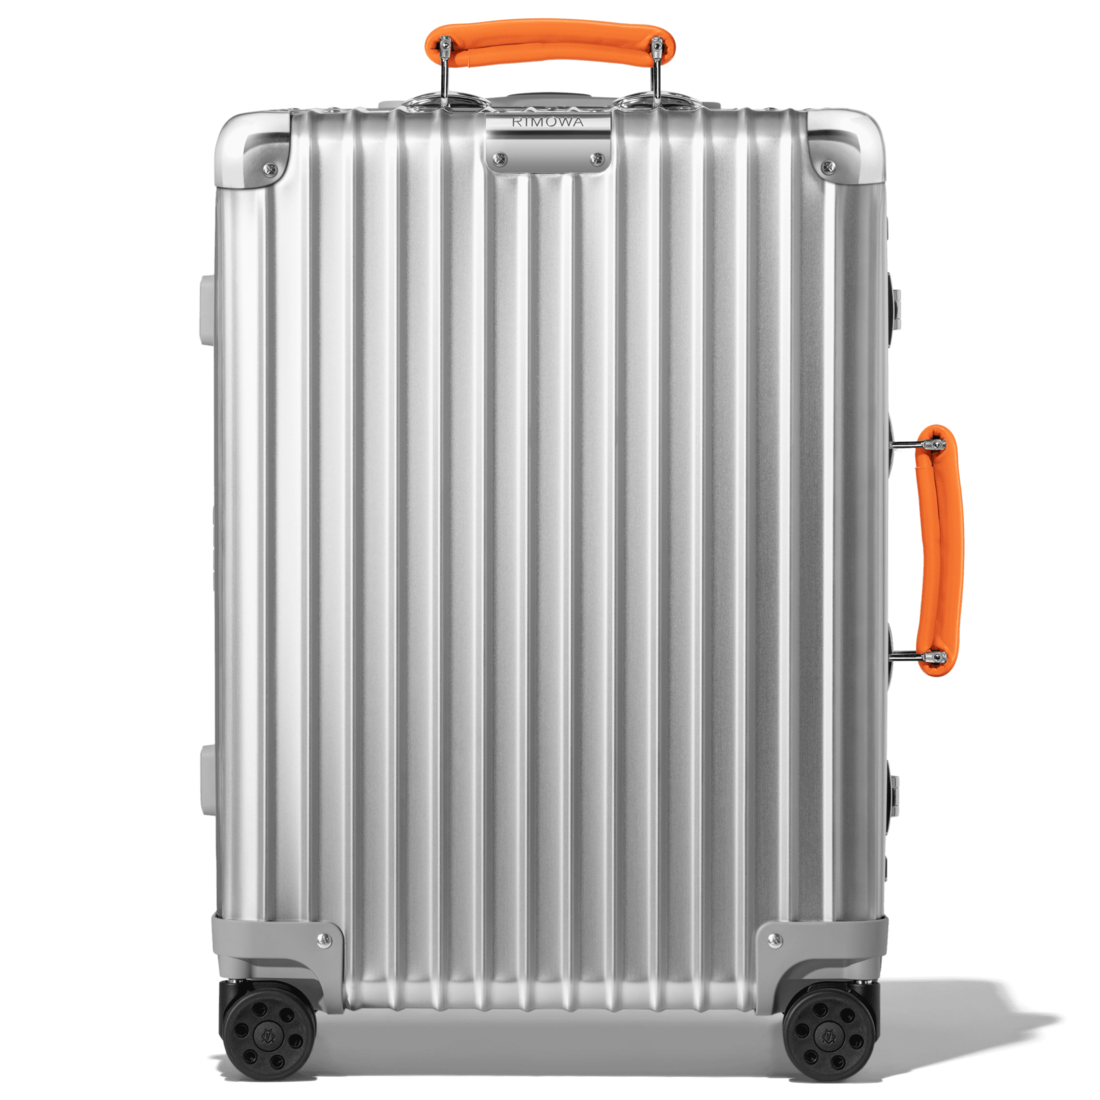 Clementine Full-Grain Leather Luggage 